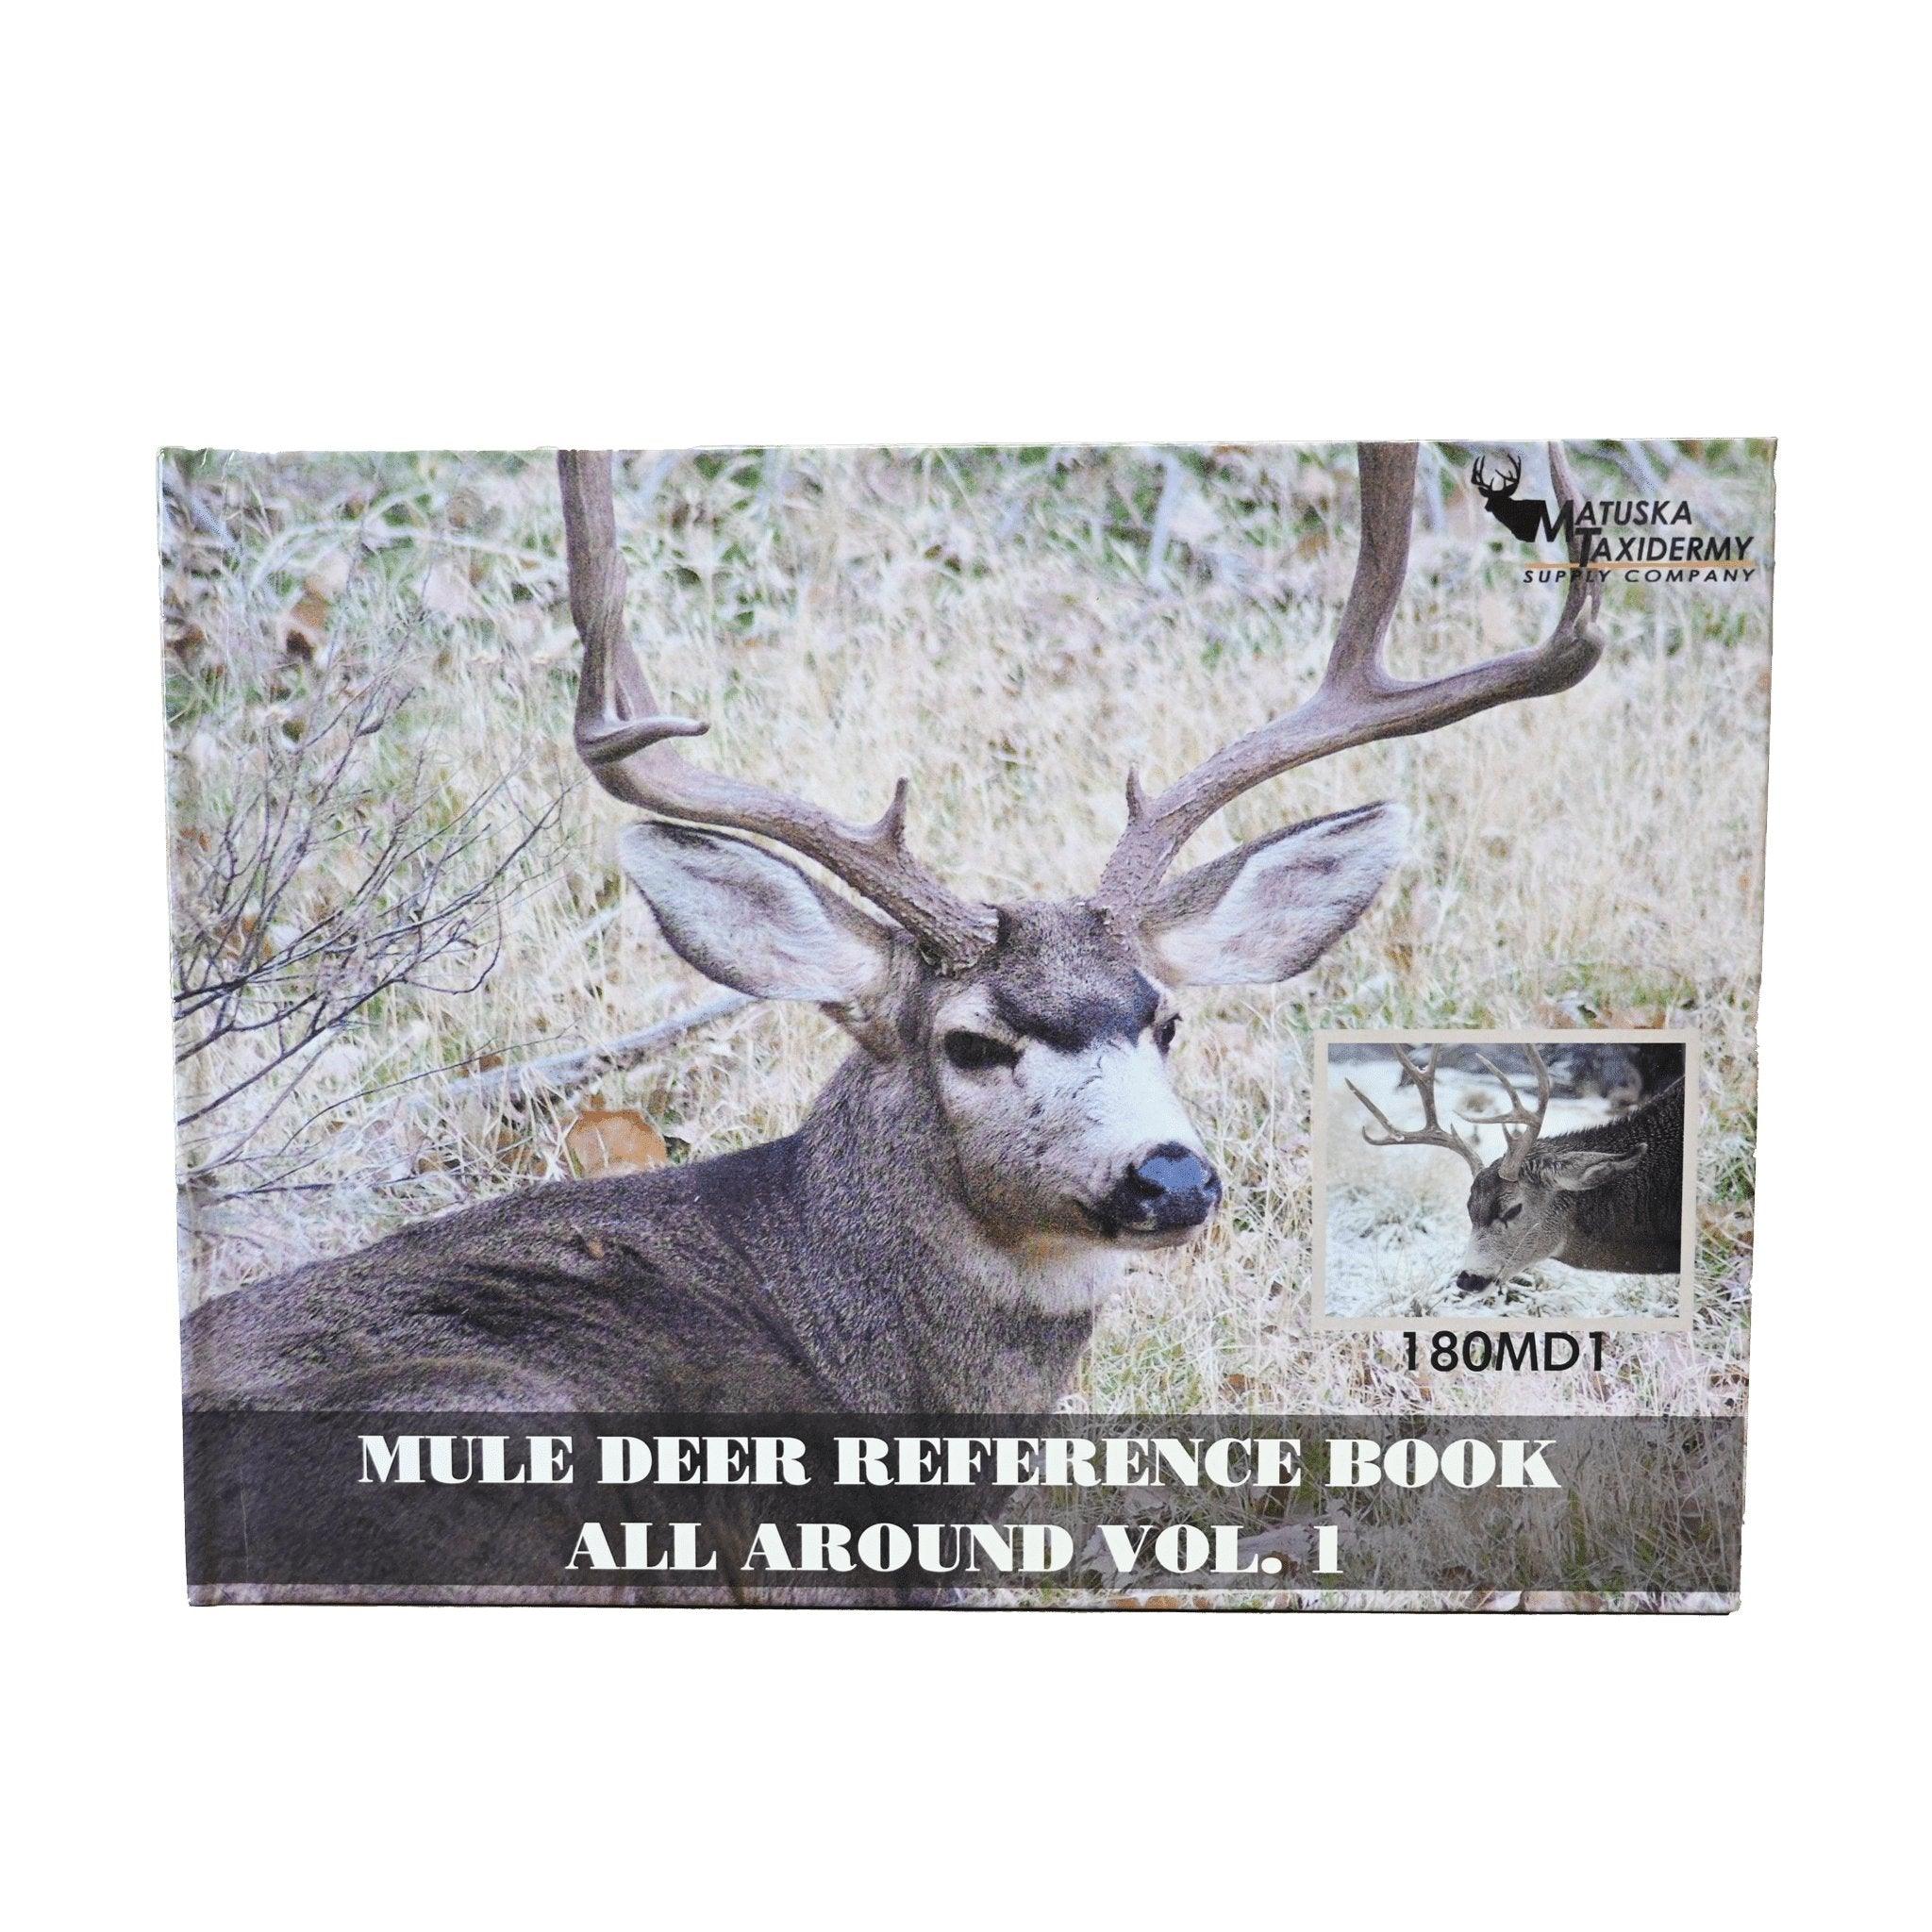 Mule Deer Reference Book by Phil Wilson - Matuska Taxidermy Supply Company